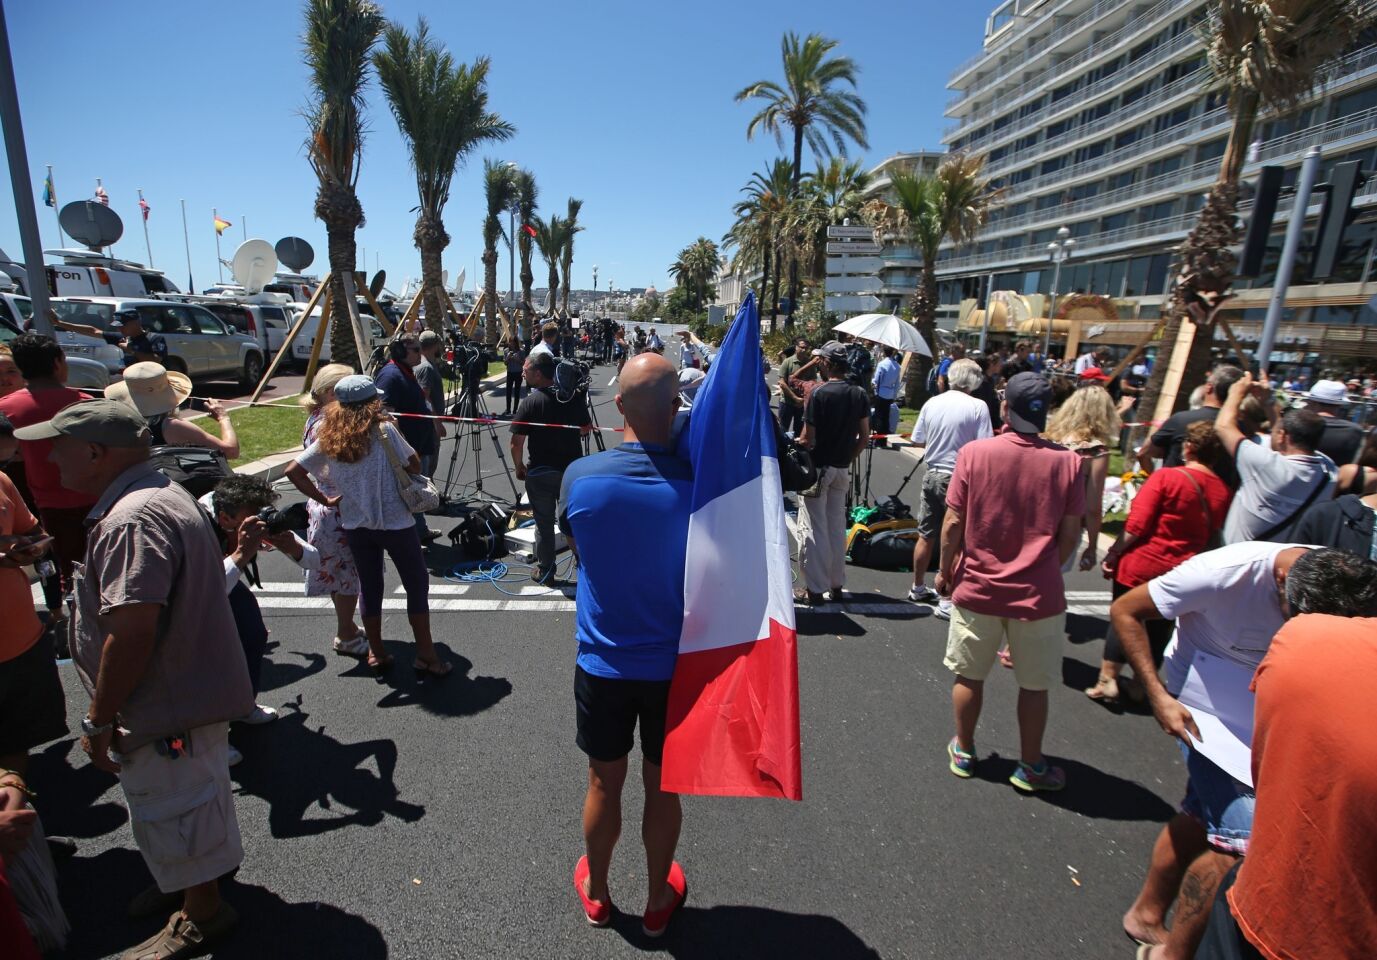 A man holding the French national flag stands near the site of the truck attack in the French resort city of Nice, France.